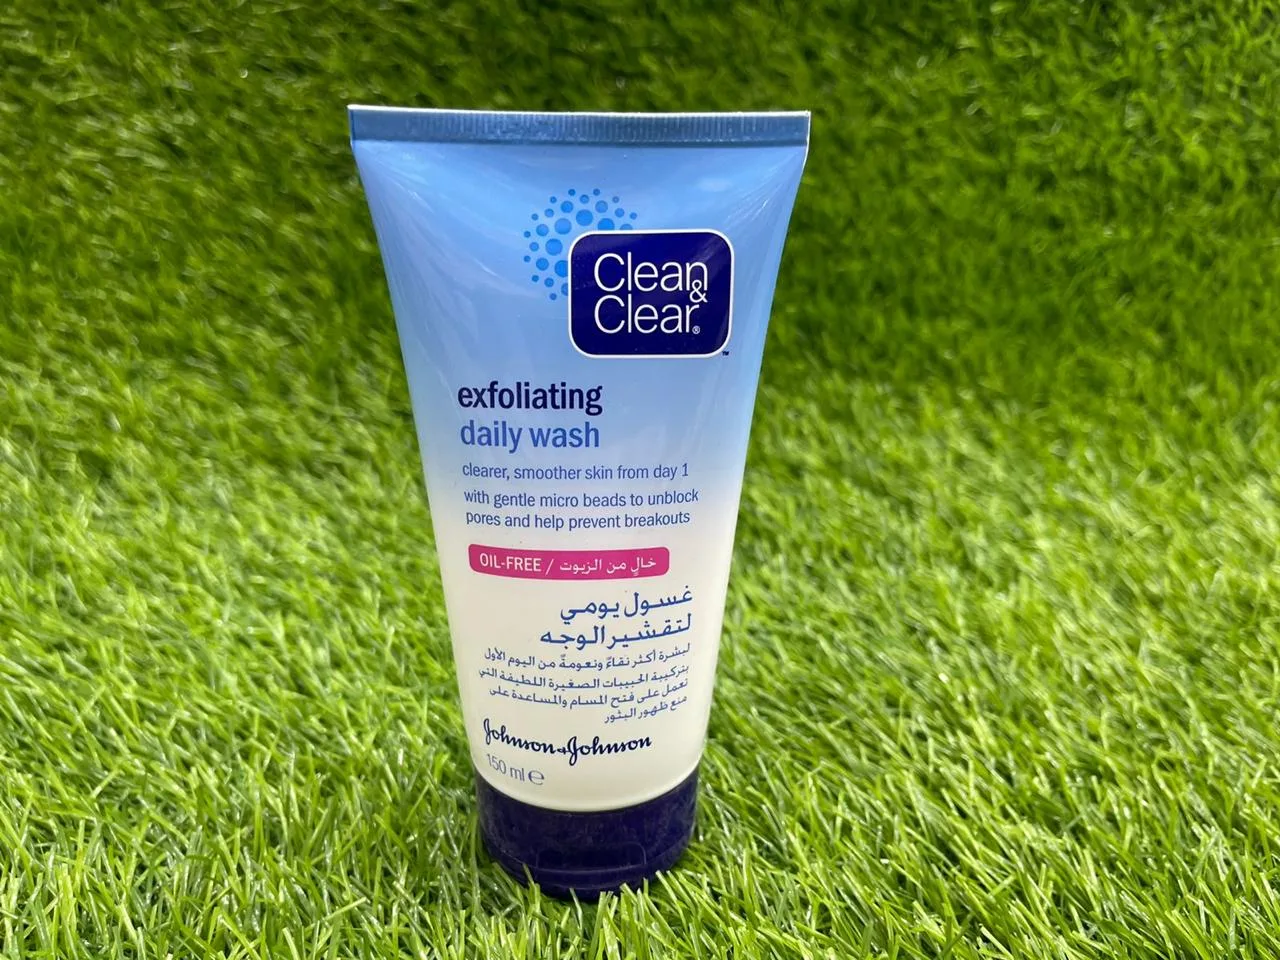 Clean & clear daily wash exfoliating 